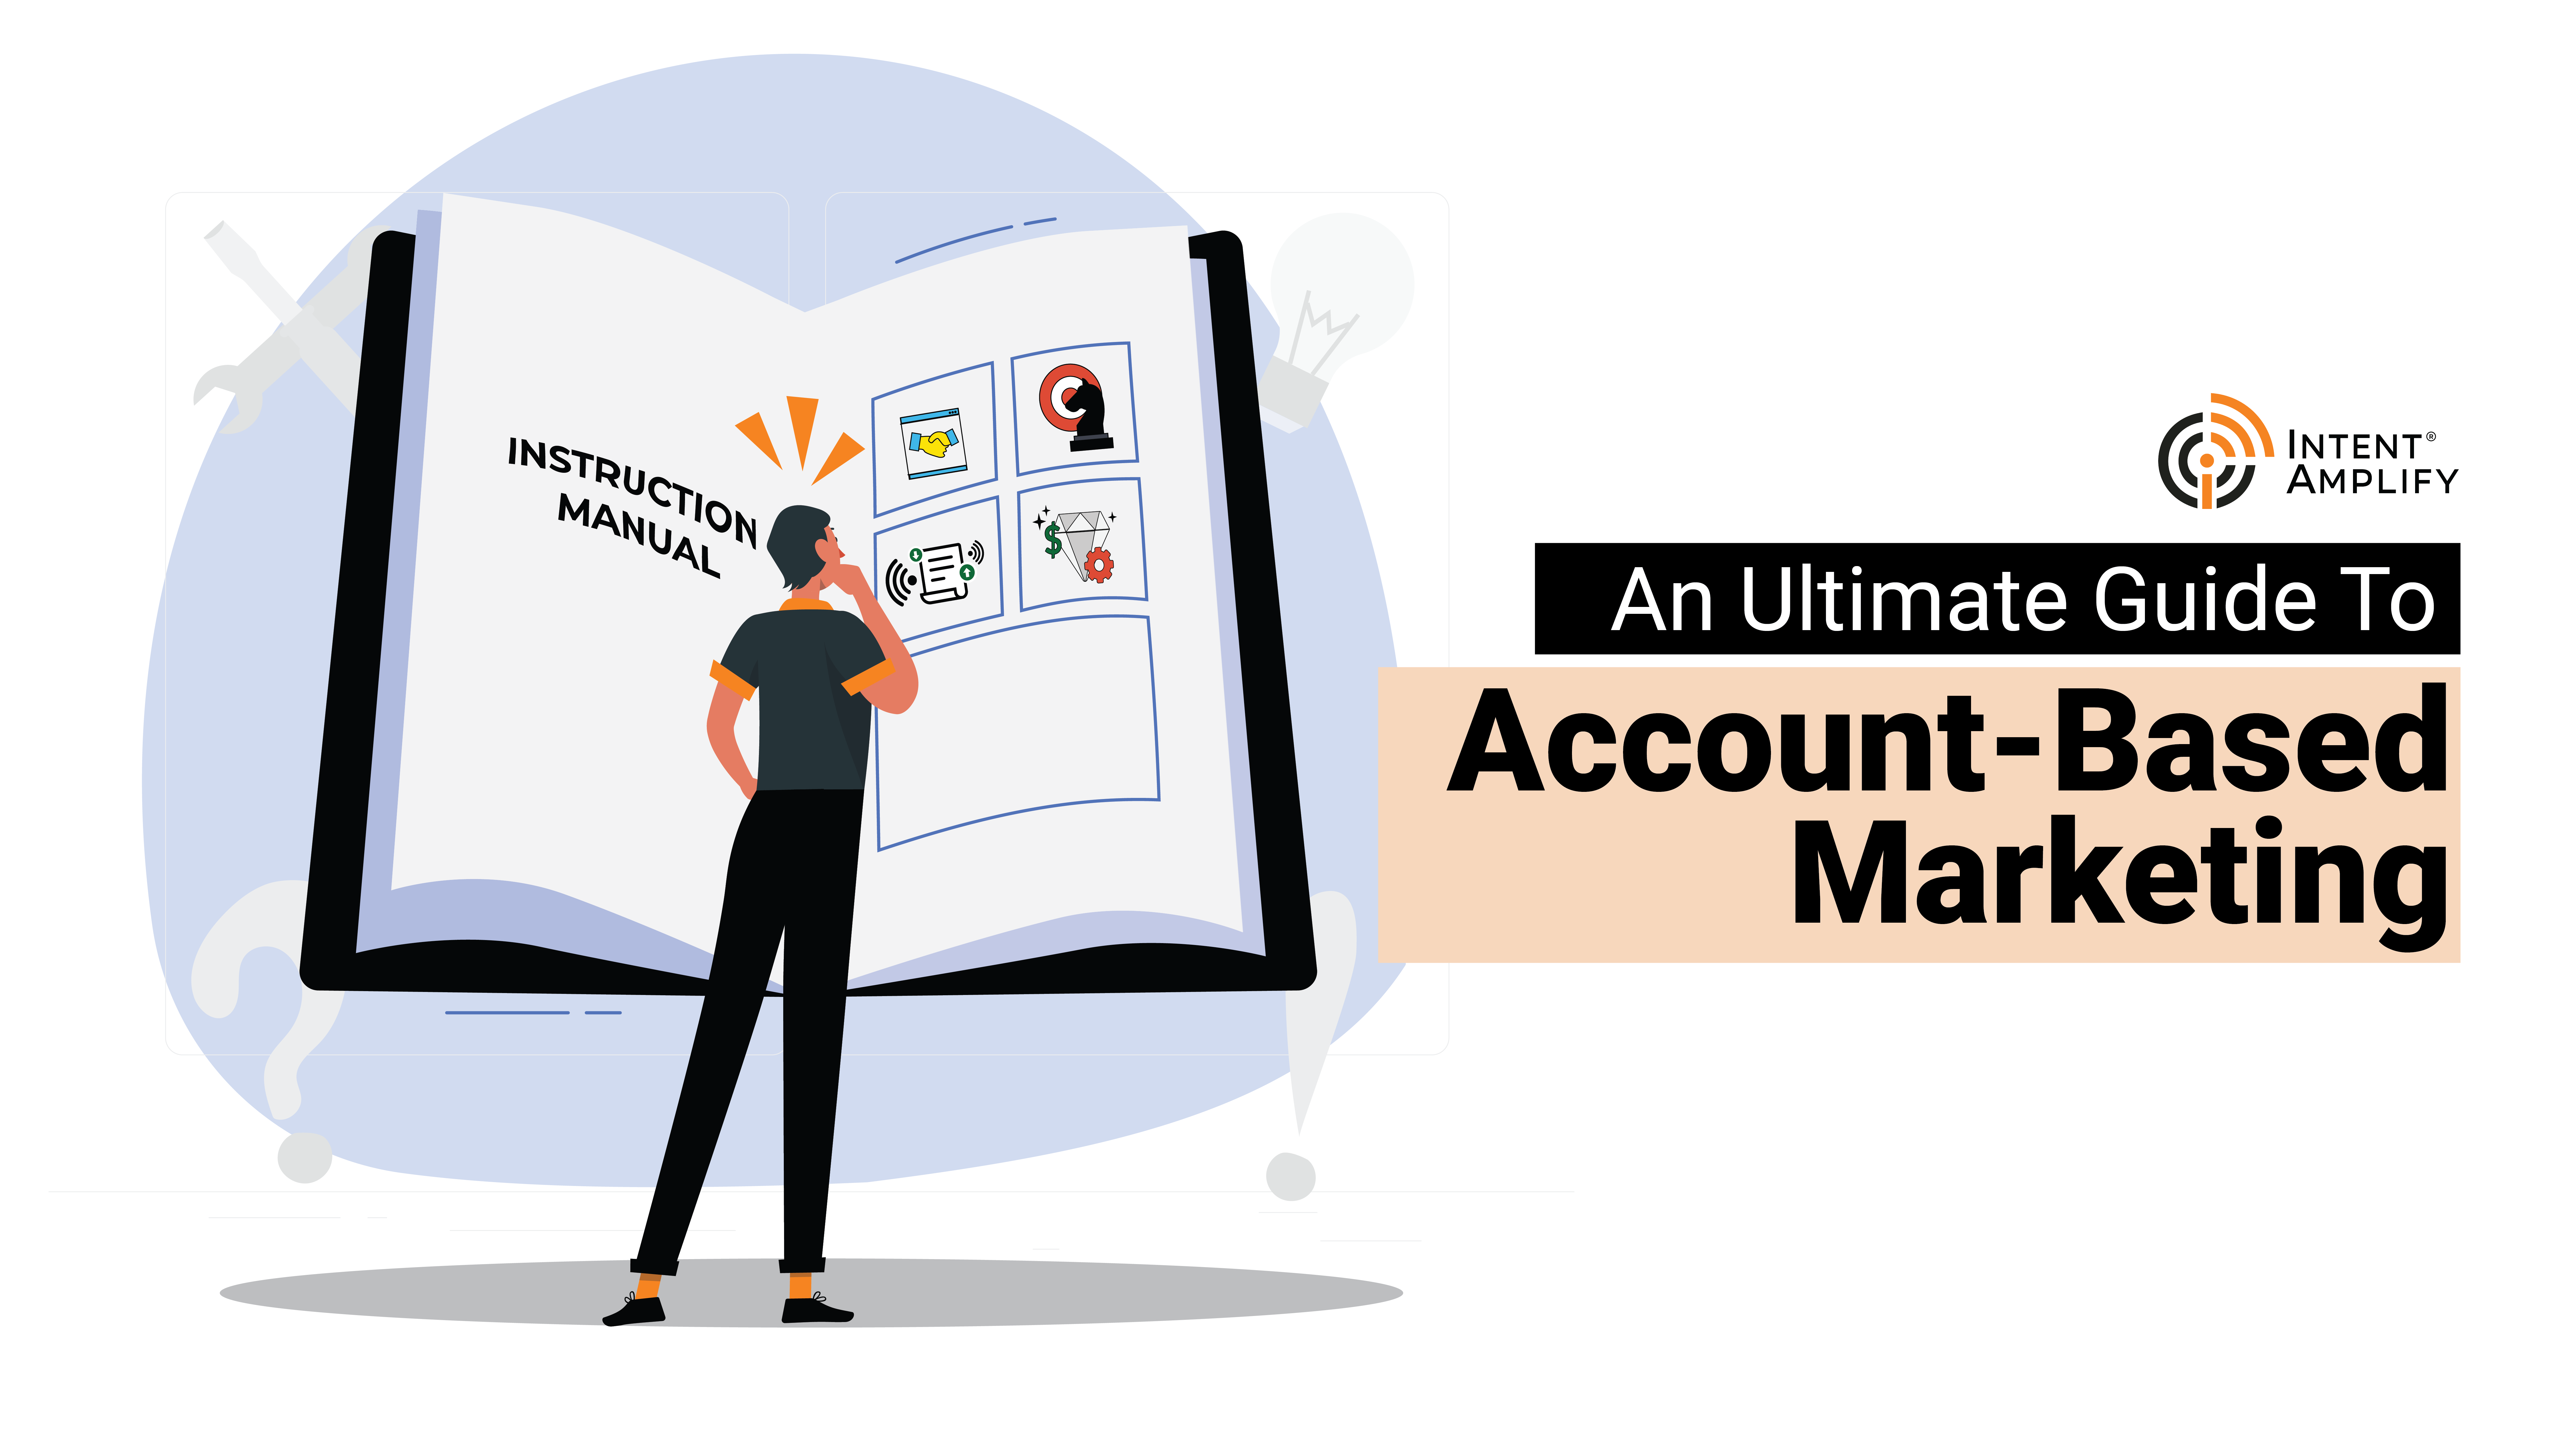 Your ultimate guide to Account-Based Marketing